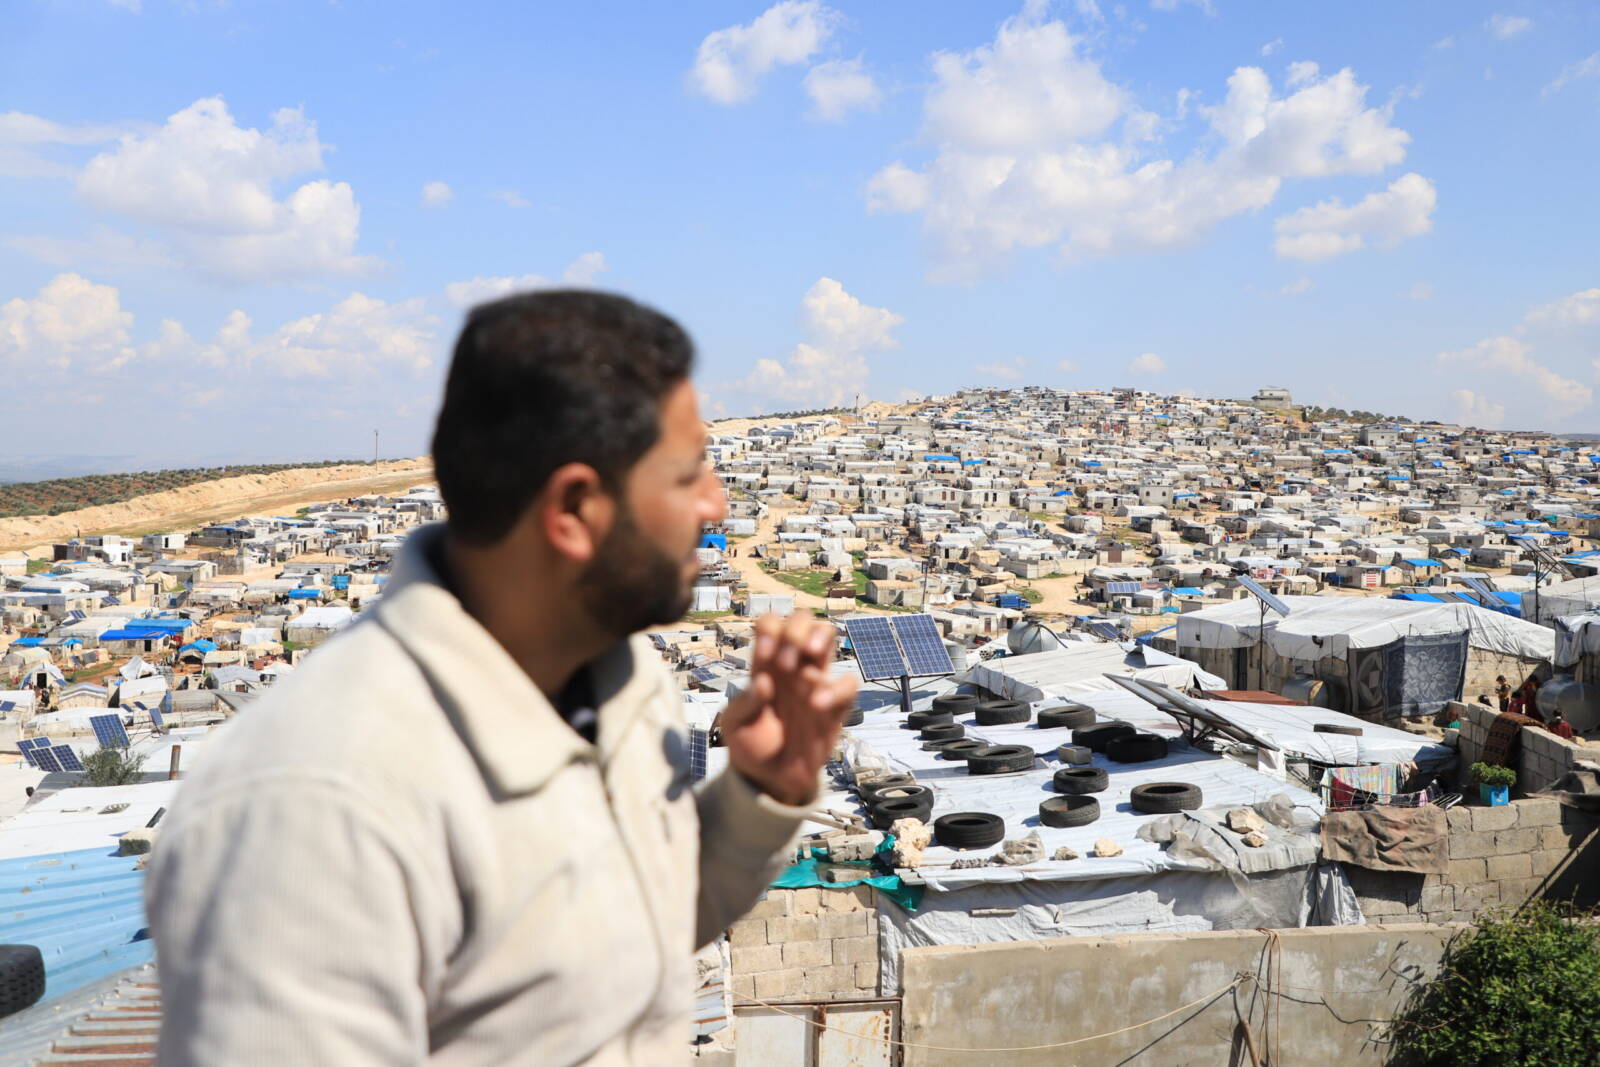 Mazen al-Wared, 40, stands on the roof of his house in the Umm al-Shuhada camp in the Atma region on the Syrian-Turkish border, 10/3/2024 (Abd Almajed Alkarh/Syria Direct)